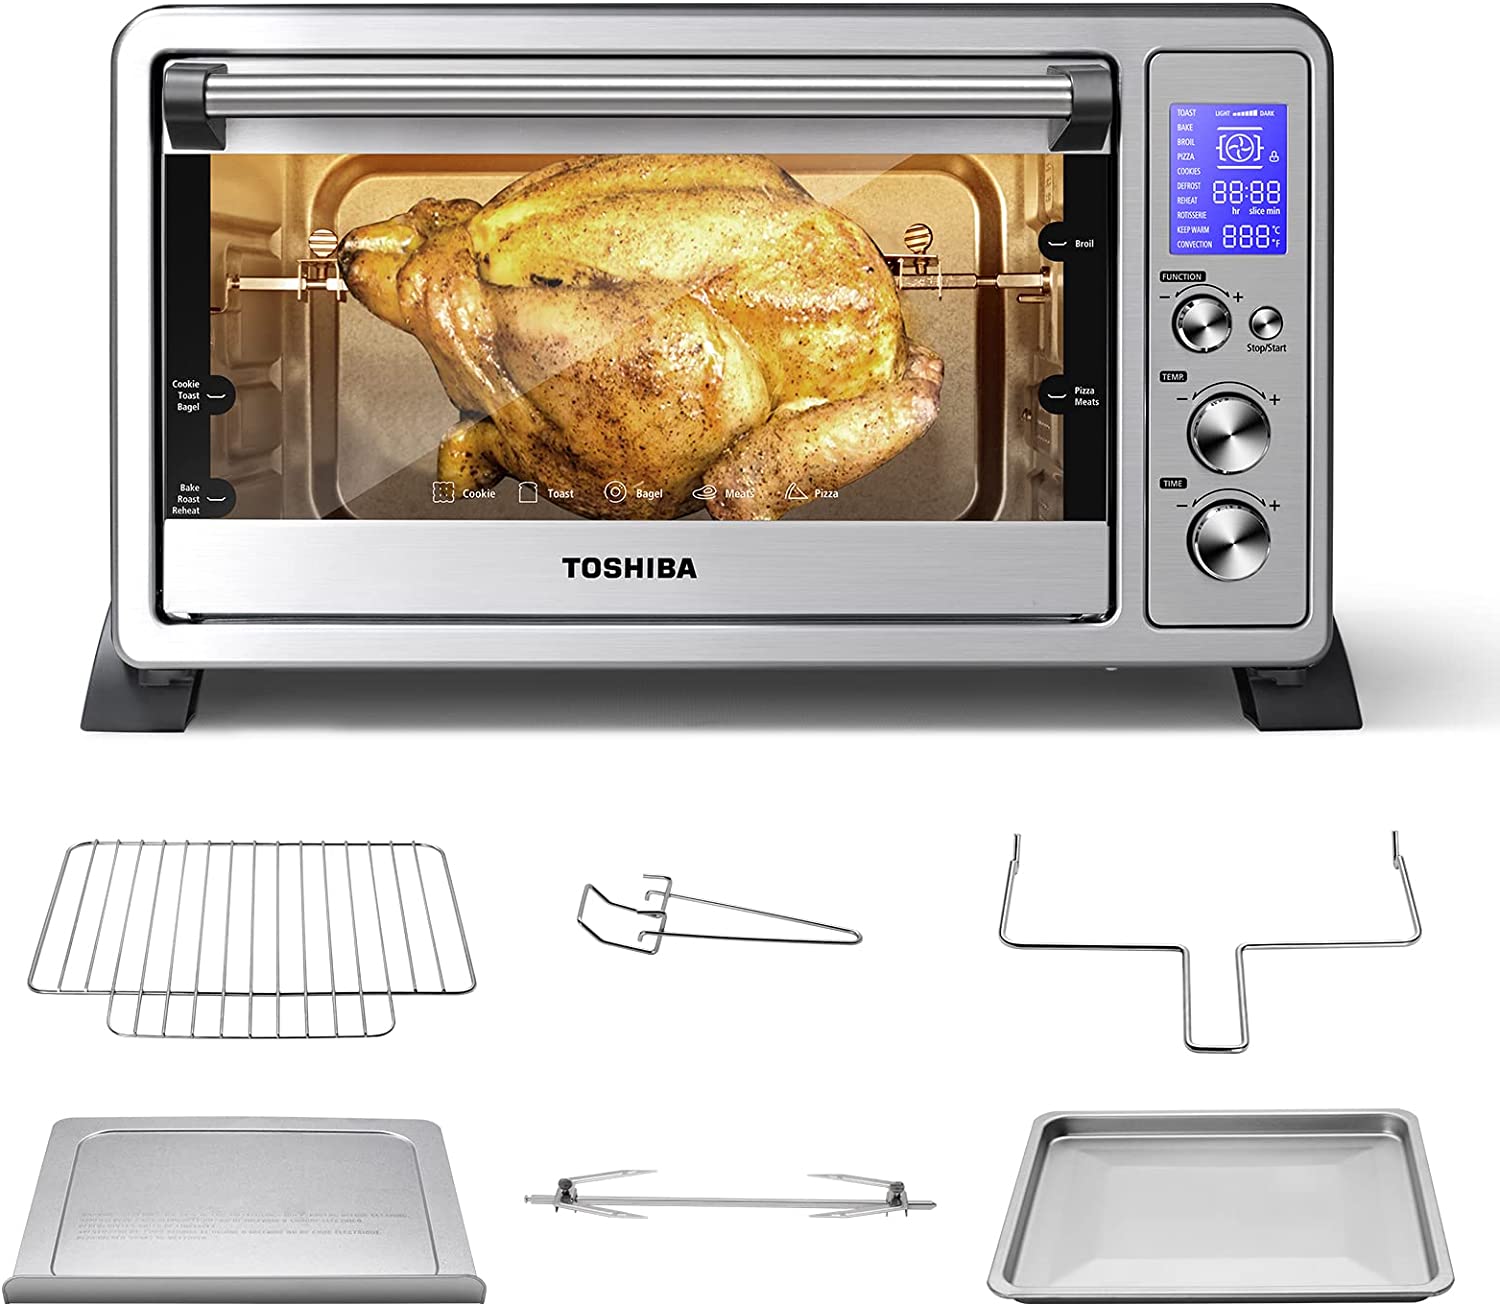 https://www.dontwasteyourmoney.com/wp-content/uploads/2021/07/toshiba-ac25cew-bs-stainless-steel-convection-toaster-oven-1.jpg